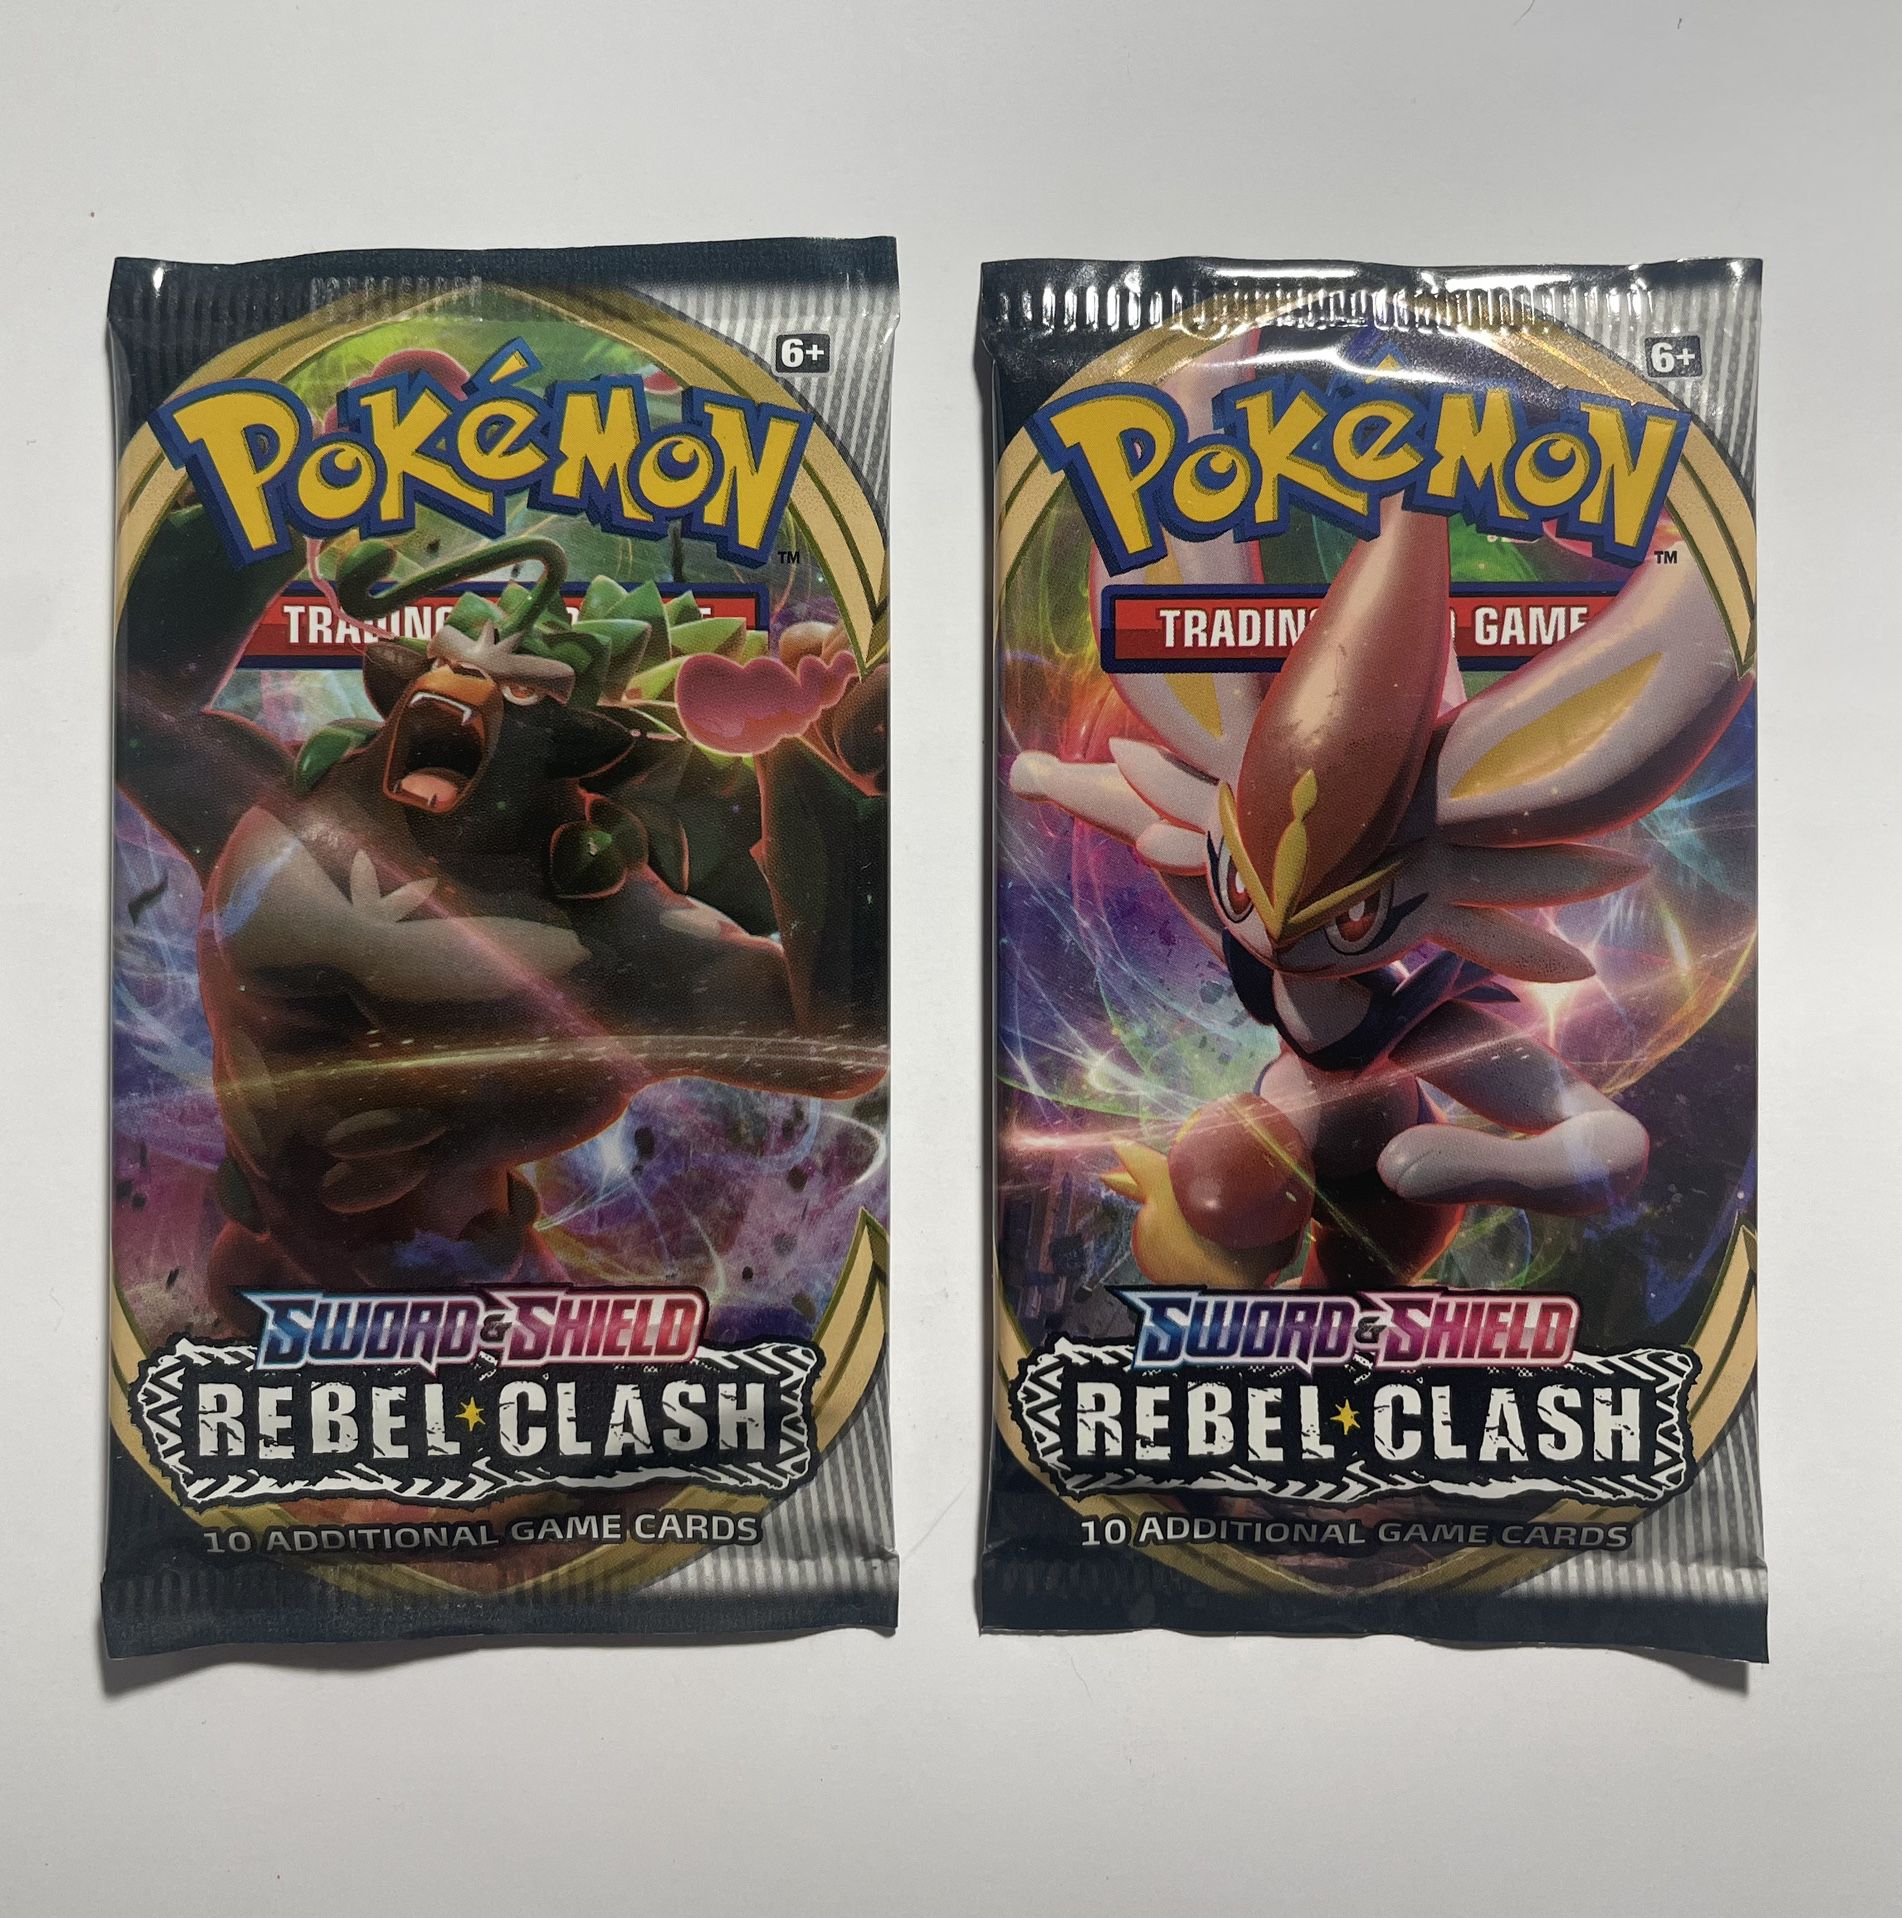 Lot of 2 sealed Pokemon TCG Sword and Shield Rebel Clash blister packs   Any loose Pokémon packs I have listed were pulled from boxes and tins, no bul